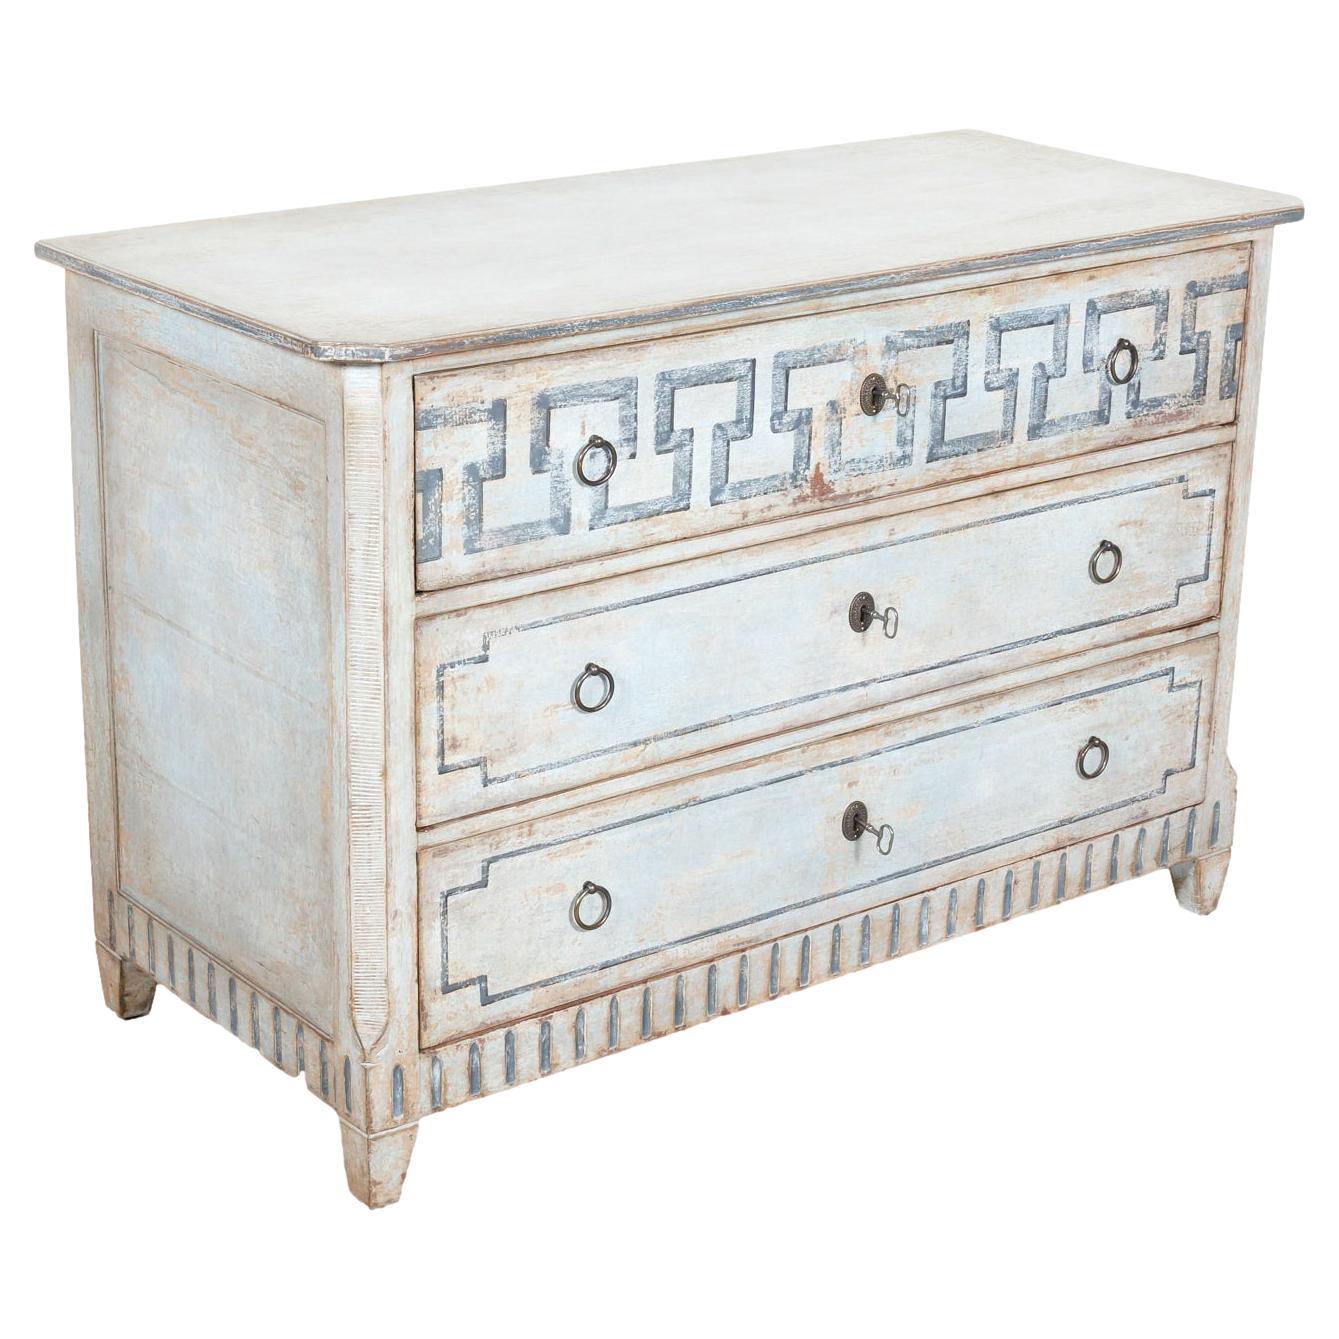 19th Century French Louis XVI Style Painted Three-Drawer Neoclassical Commode